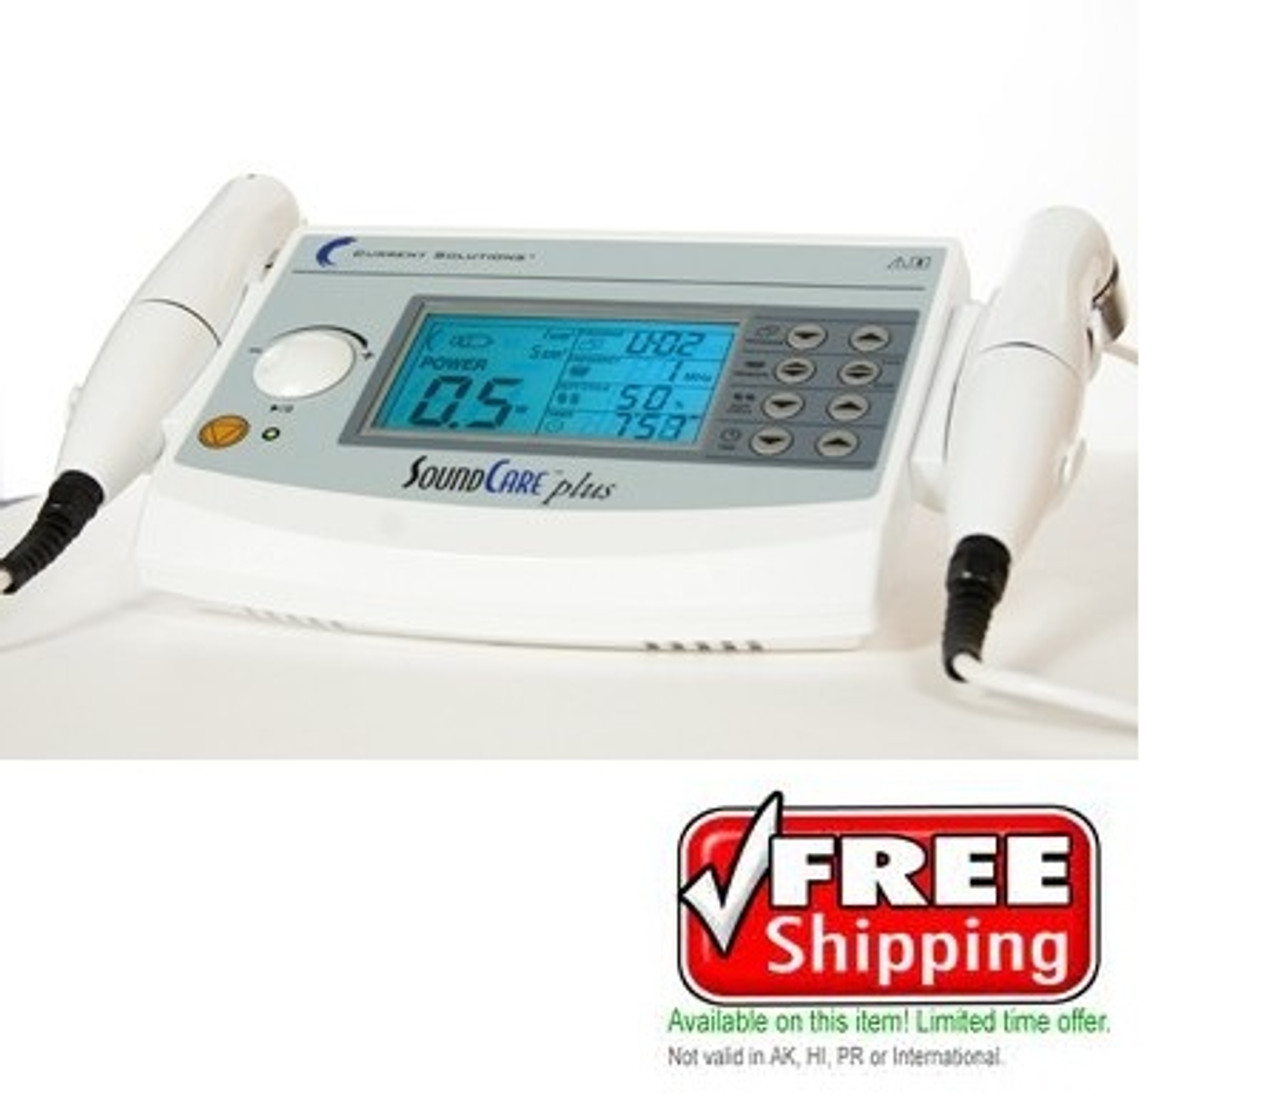 New Hill HF54 PLUS Hands-Free Ultrasound Therapy Unit with